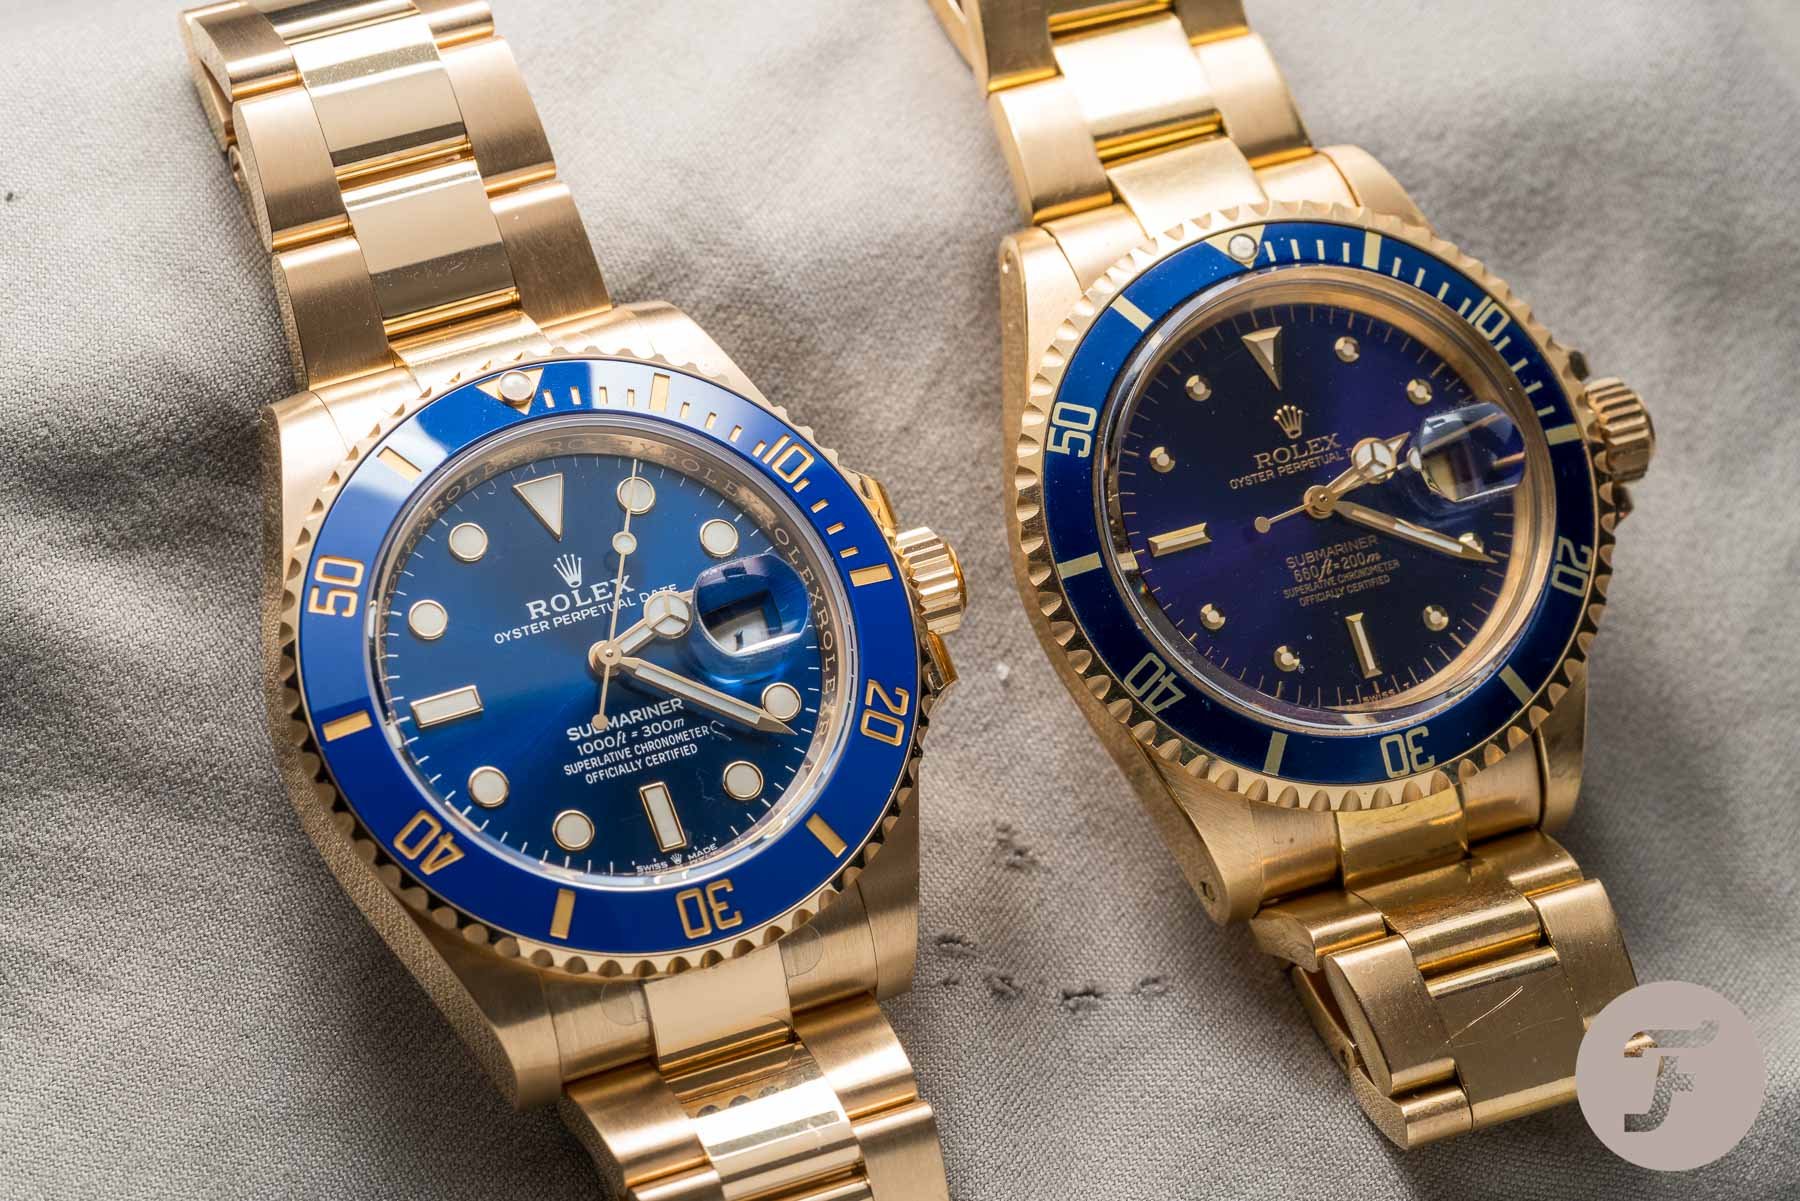 The New Rolex Submariner Date In Gold Reference 126618LB